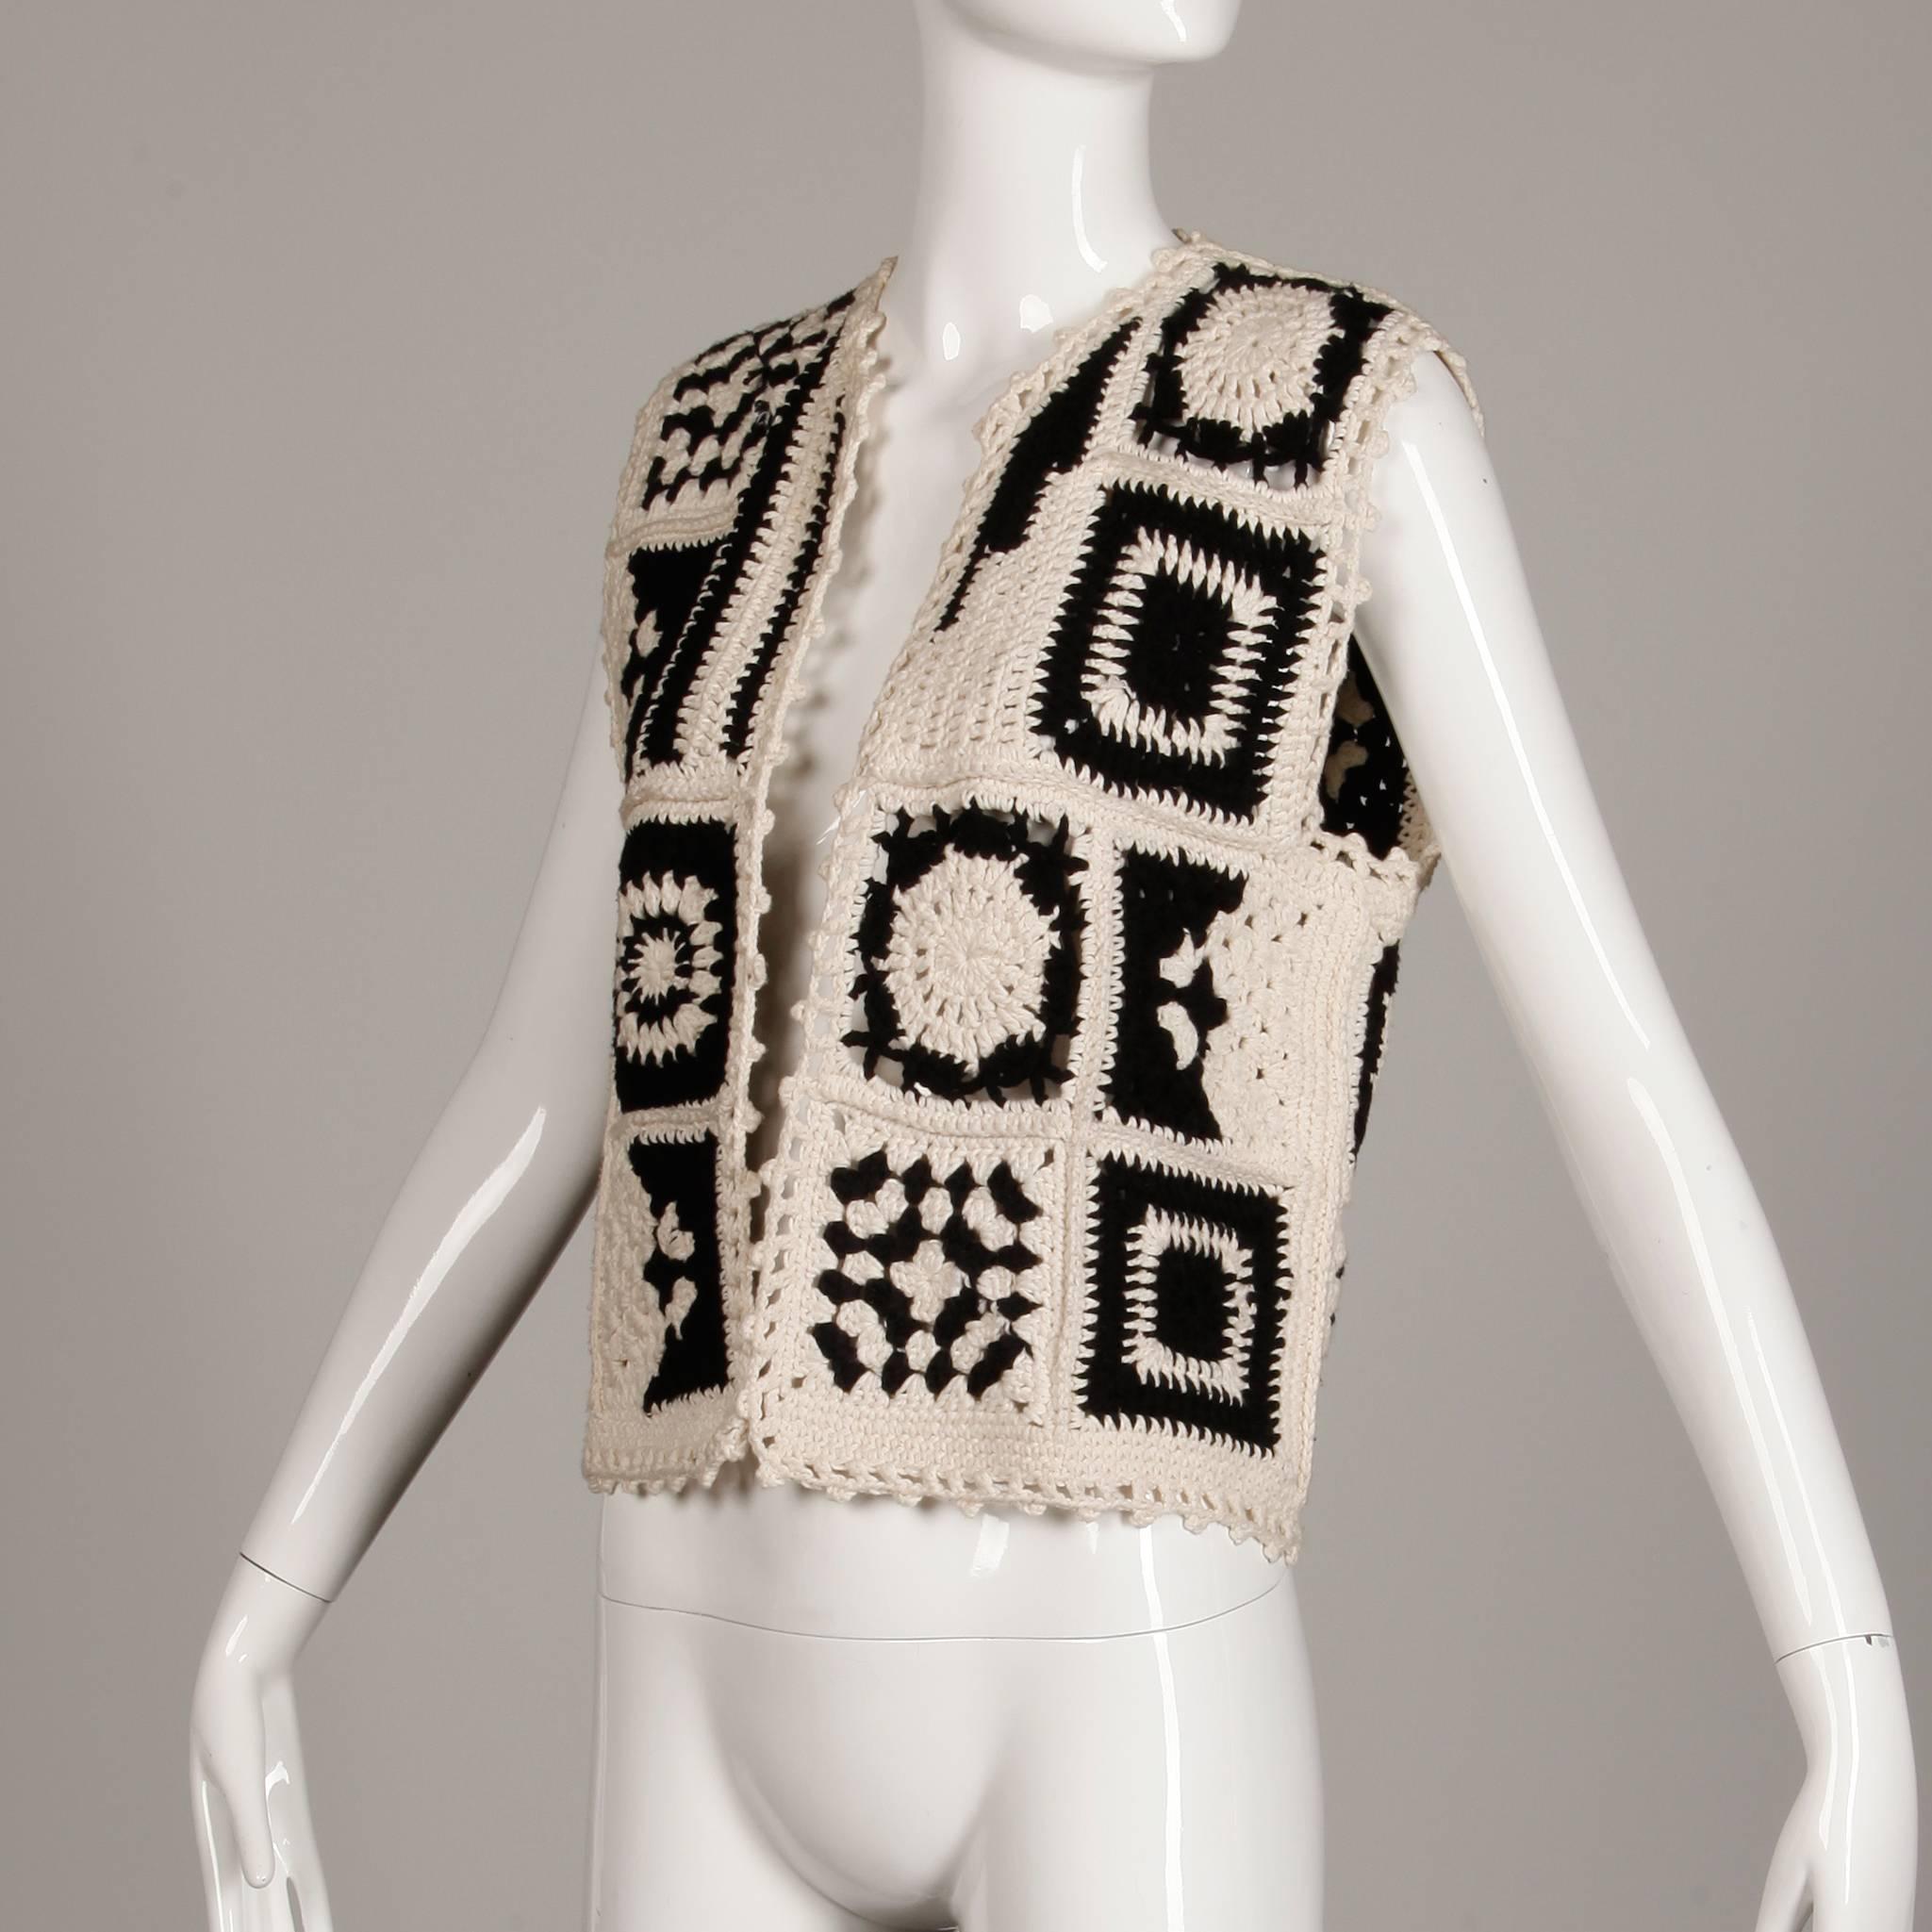 Women's or Men's 1990s Moschino Couture! Vintage Crochet Granny Squares Boho Vest, Top or Jacket